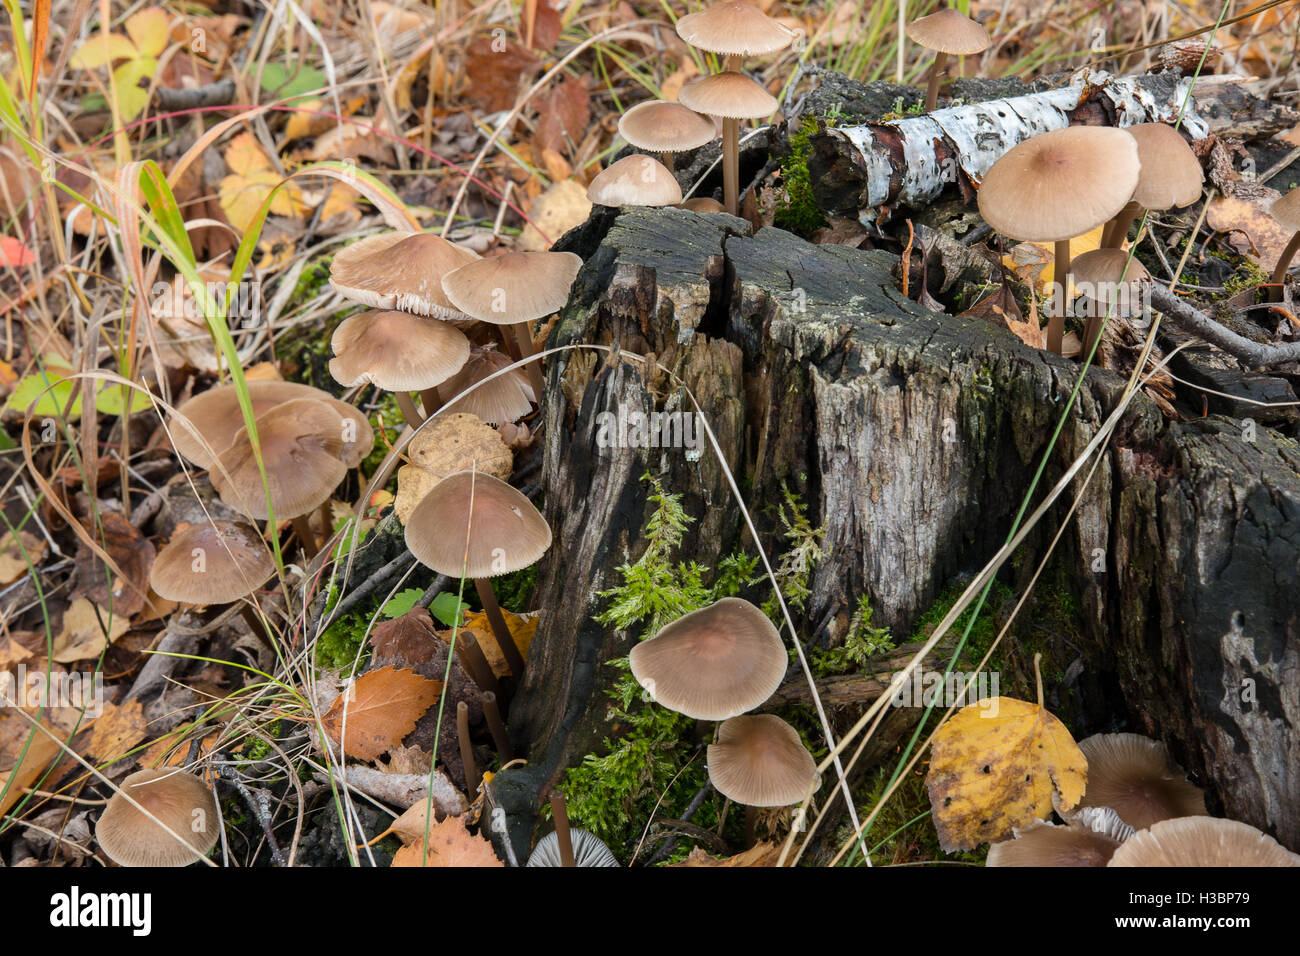 poisonous mushrooms grow on old stump in the woods Stock Photo